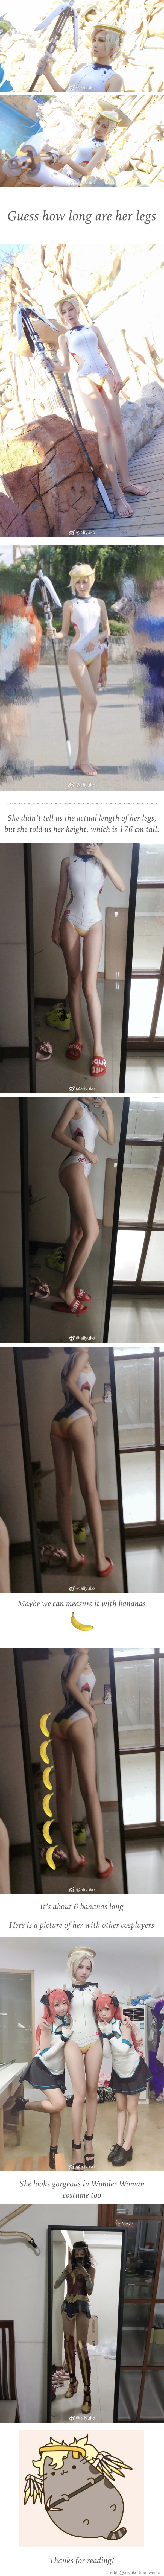 This Chinese Girl May Have The Perfect Body Proportion For Cosplaying Every Character